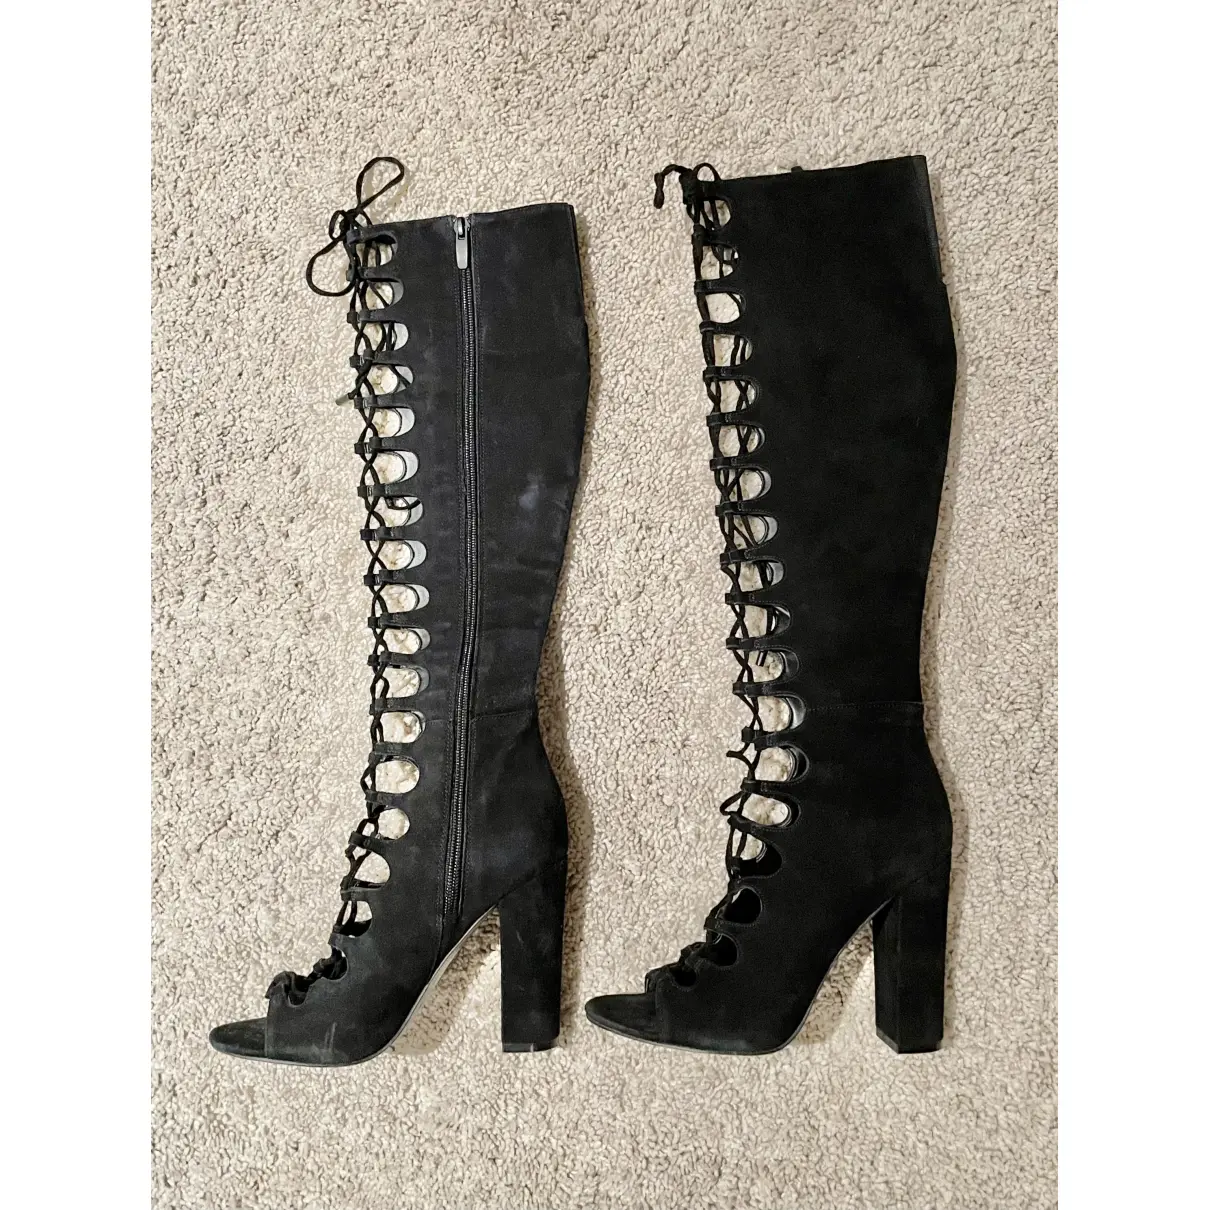 Buy Kendall + Kylie Boots online